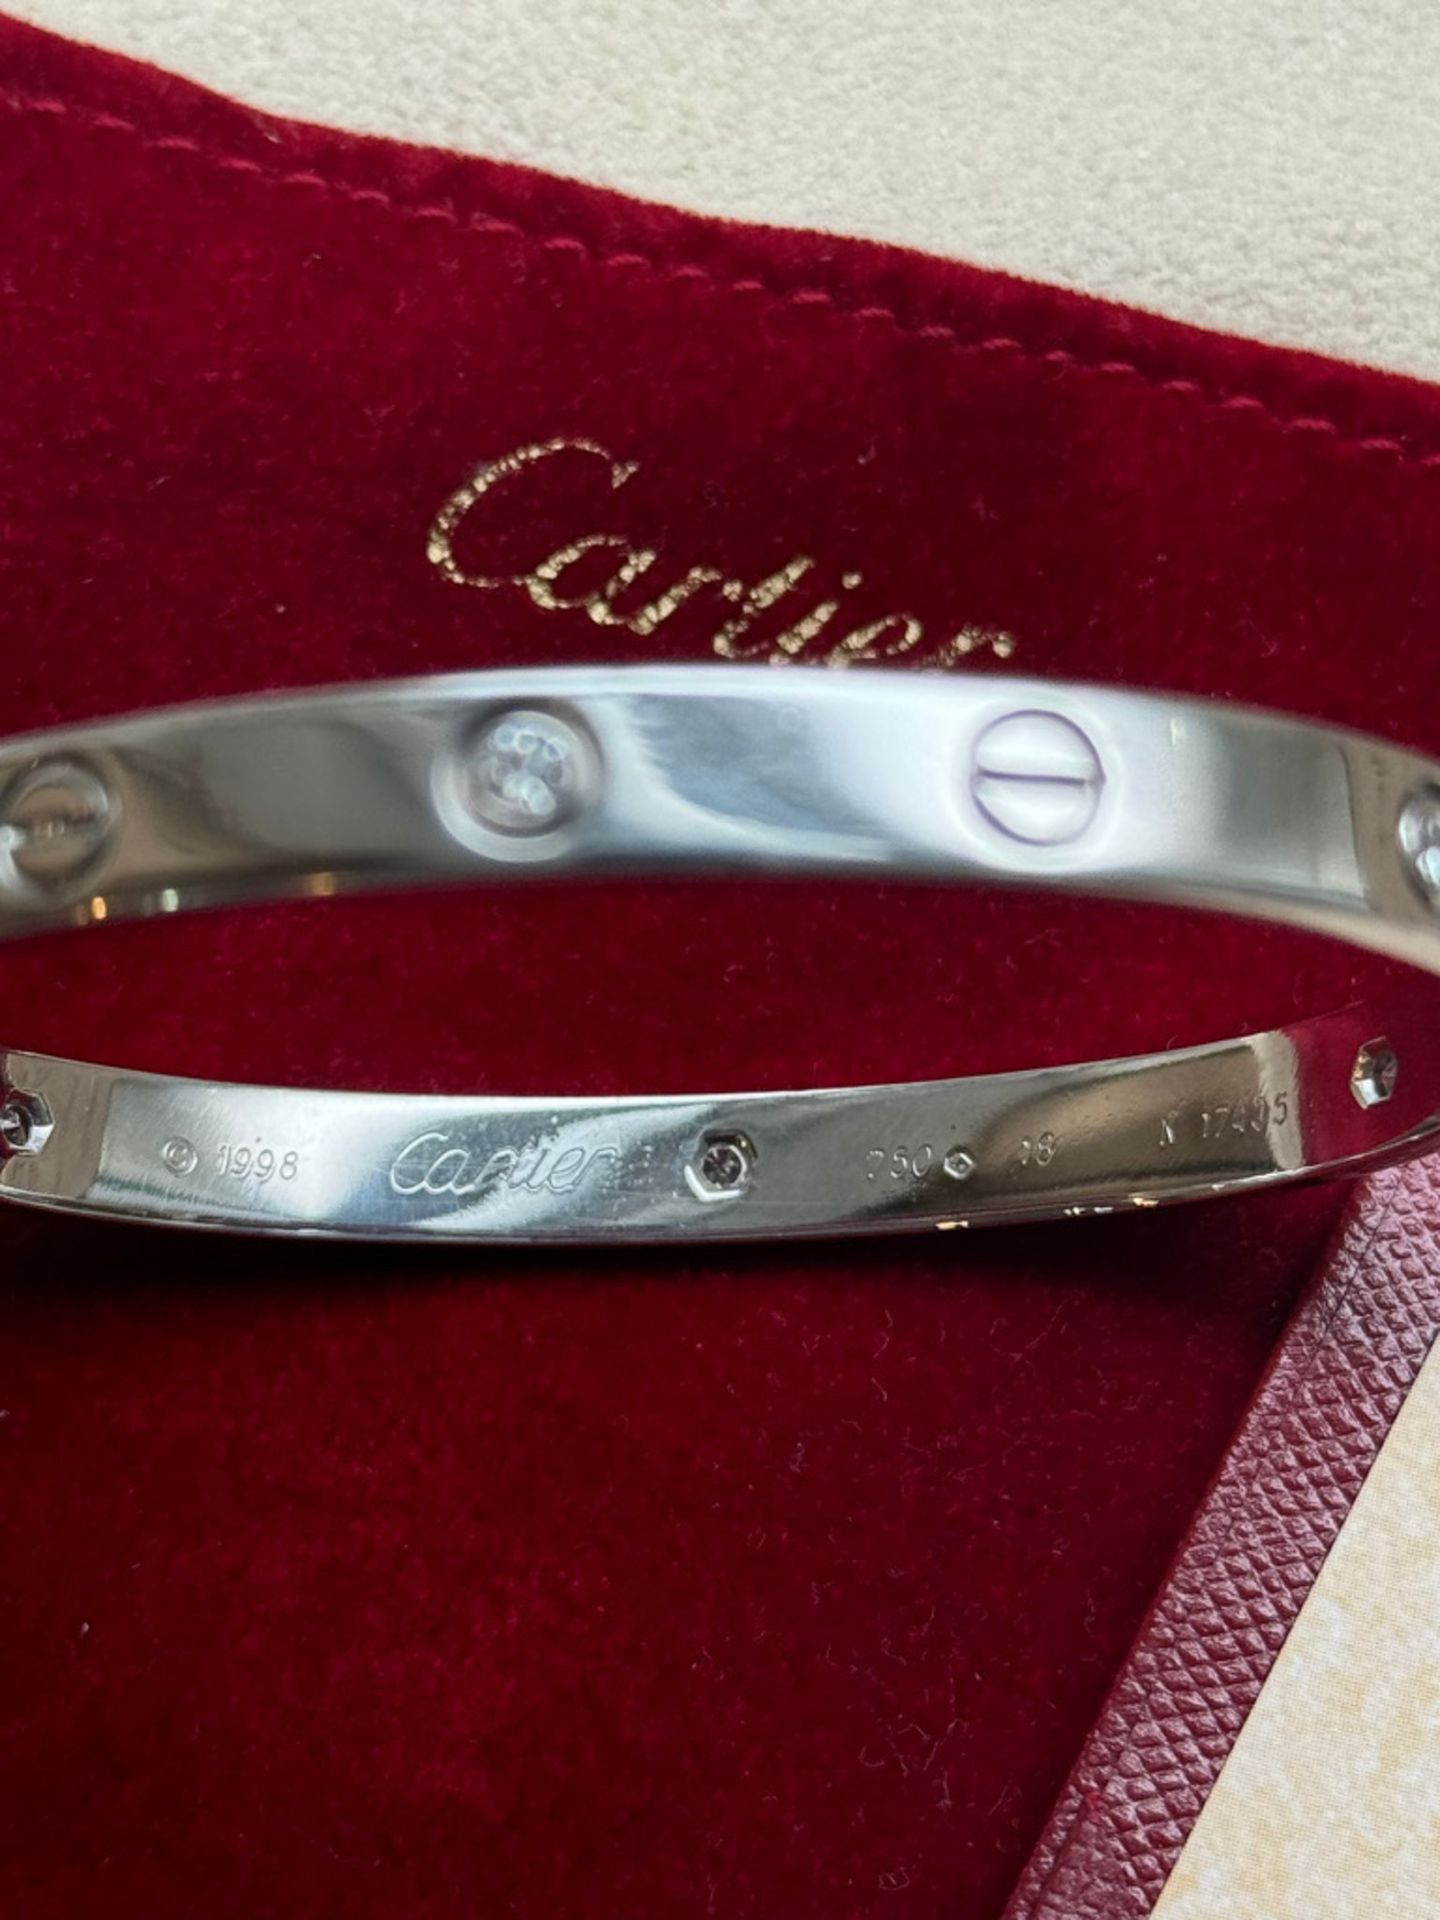 CARTIER DIAMOND SET 18ct WHITE GOLD BANGLE WITH PAPERWORK & POUCH - SIZE 18 - Image 11 of 13